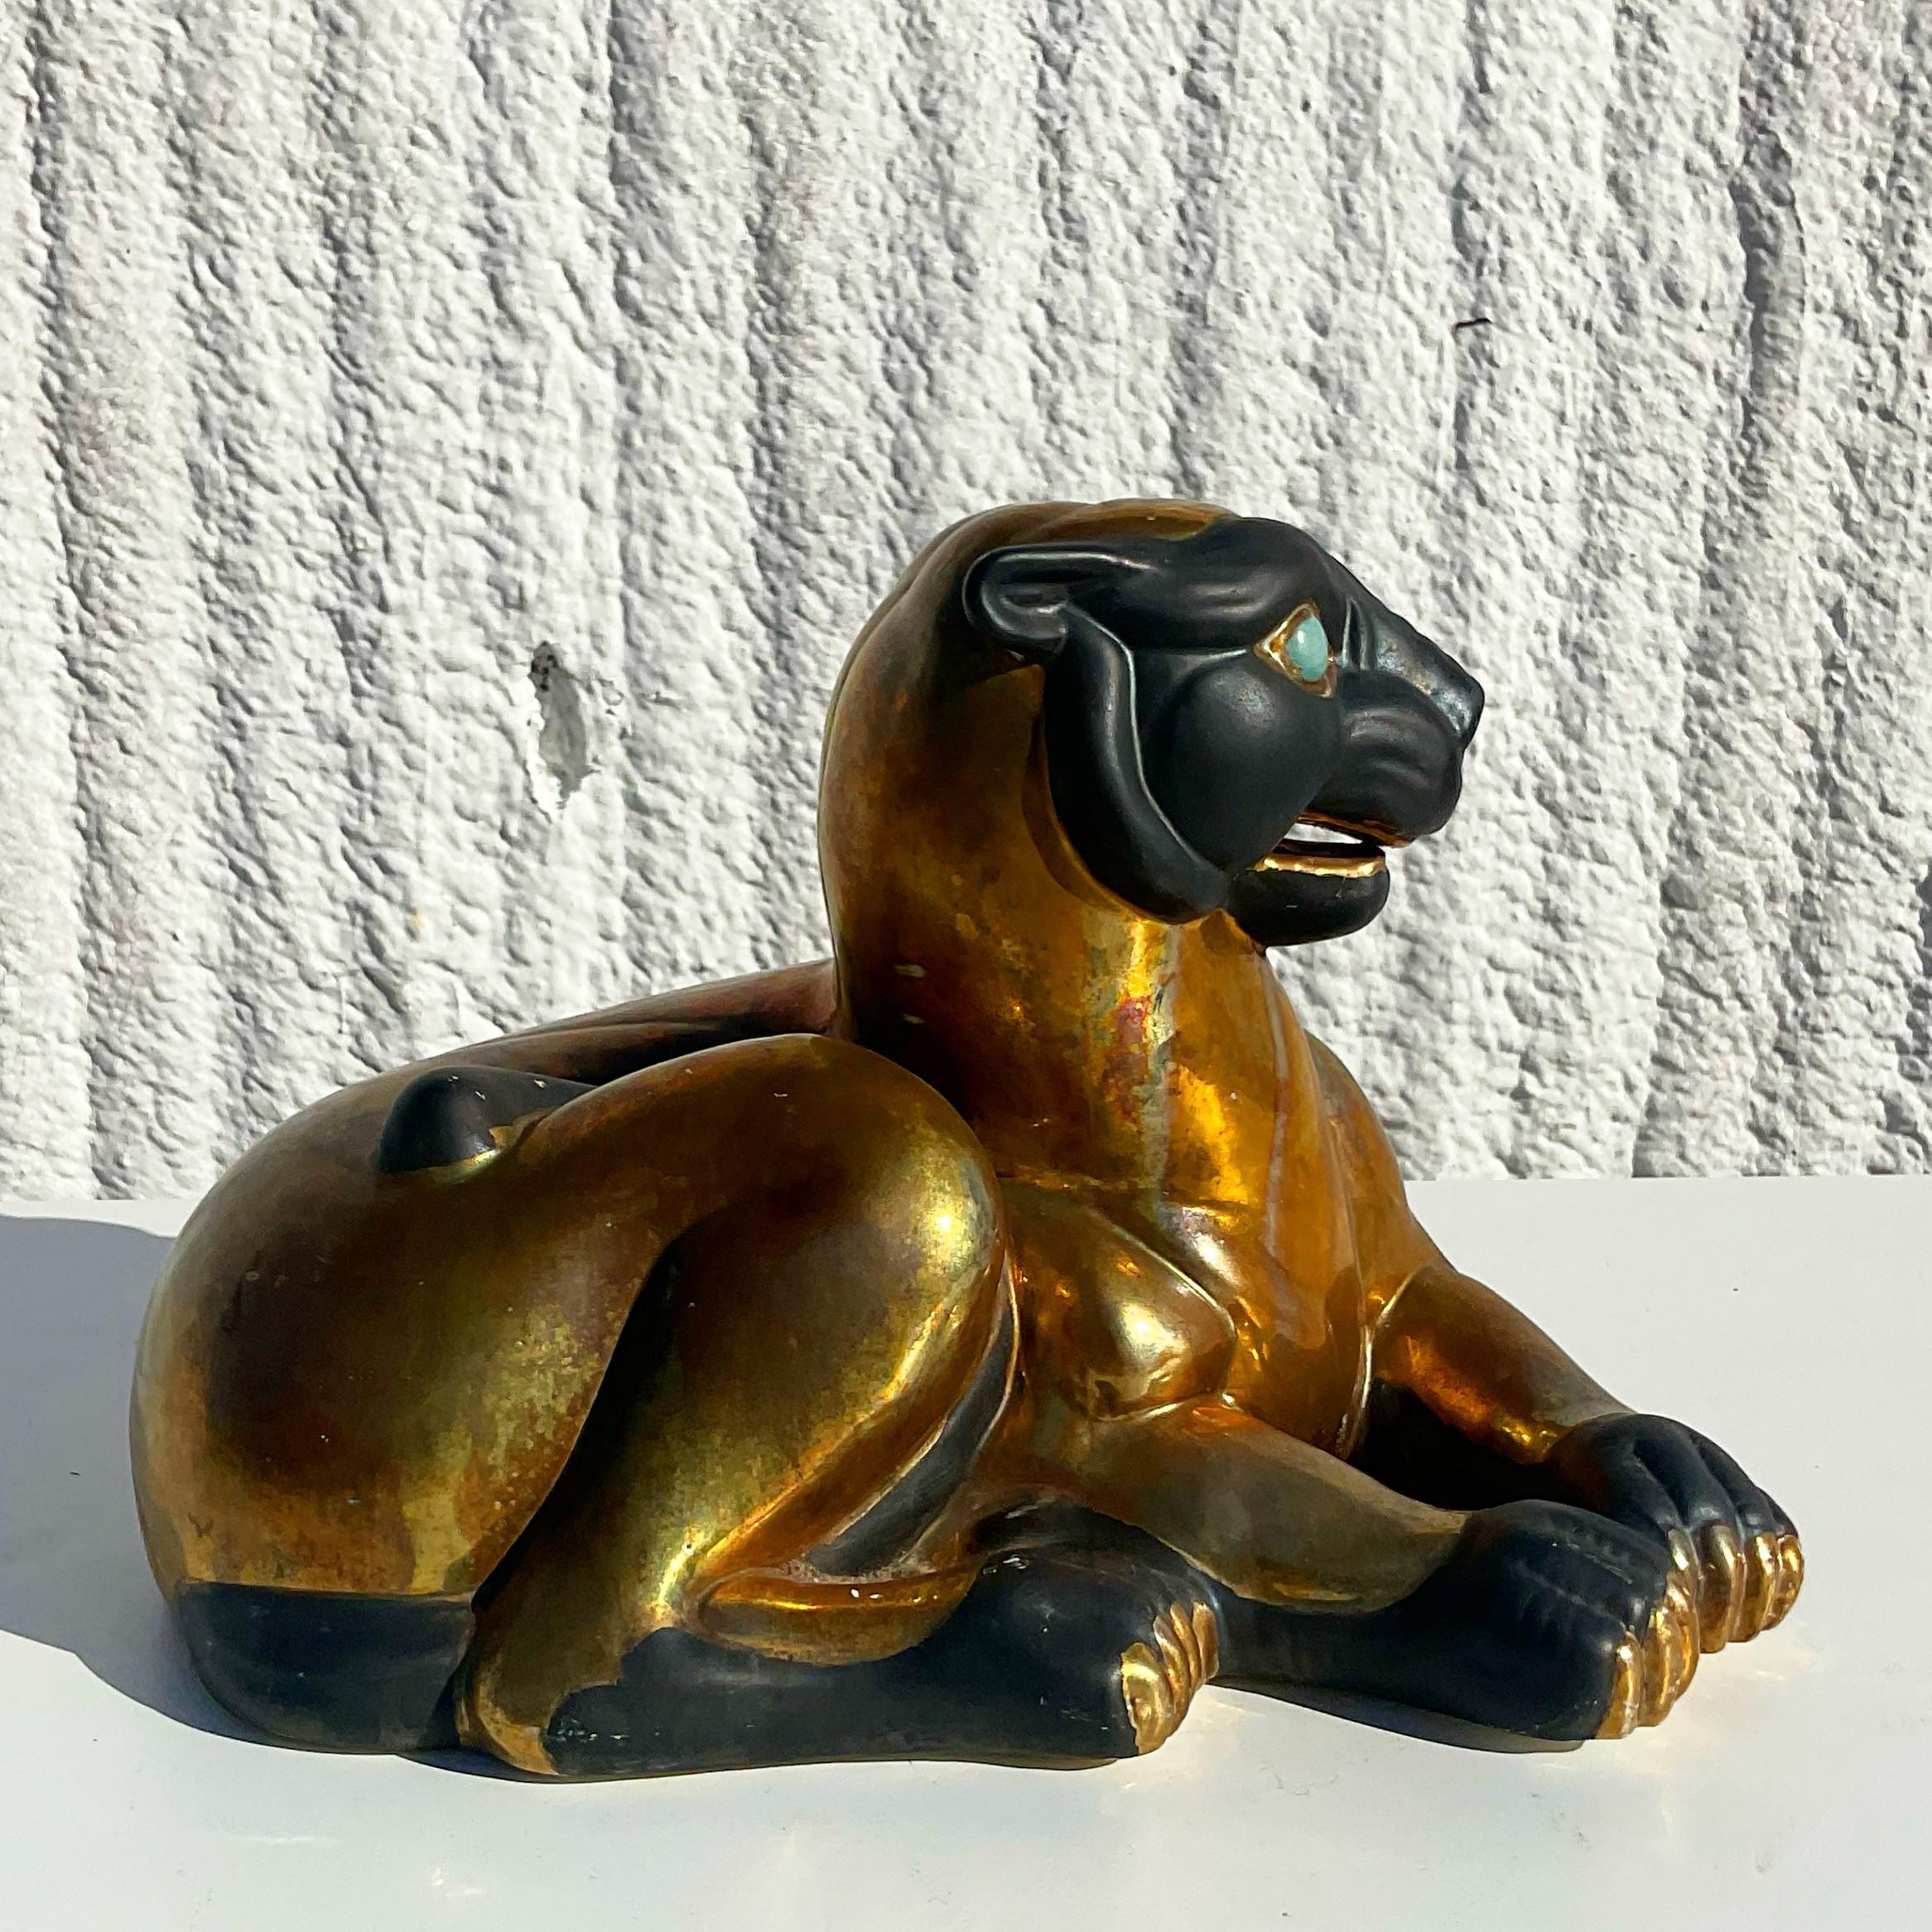 Gorgeous vintage gilt baby panther. Marked on the bottom with an Asian character. Bright and beautiful gilt finish with piercing blue stone eyes. Perfect to add a flash of glamour to any decor. Acquired from a Palm Beach estate.